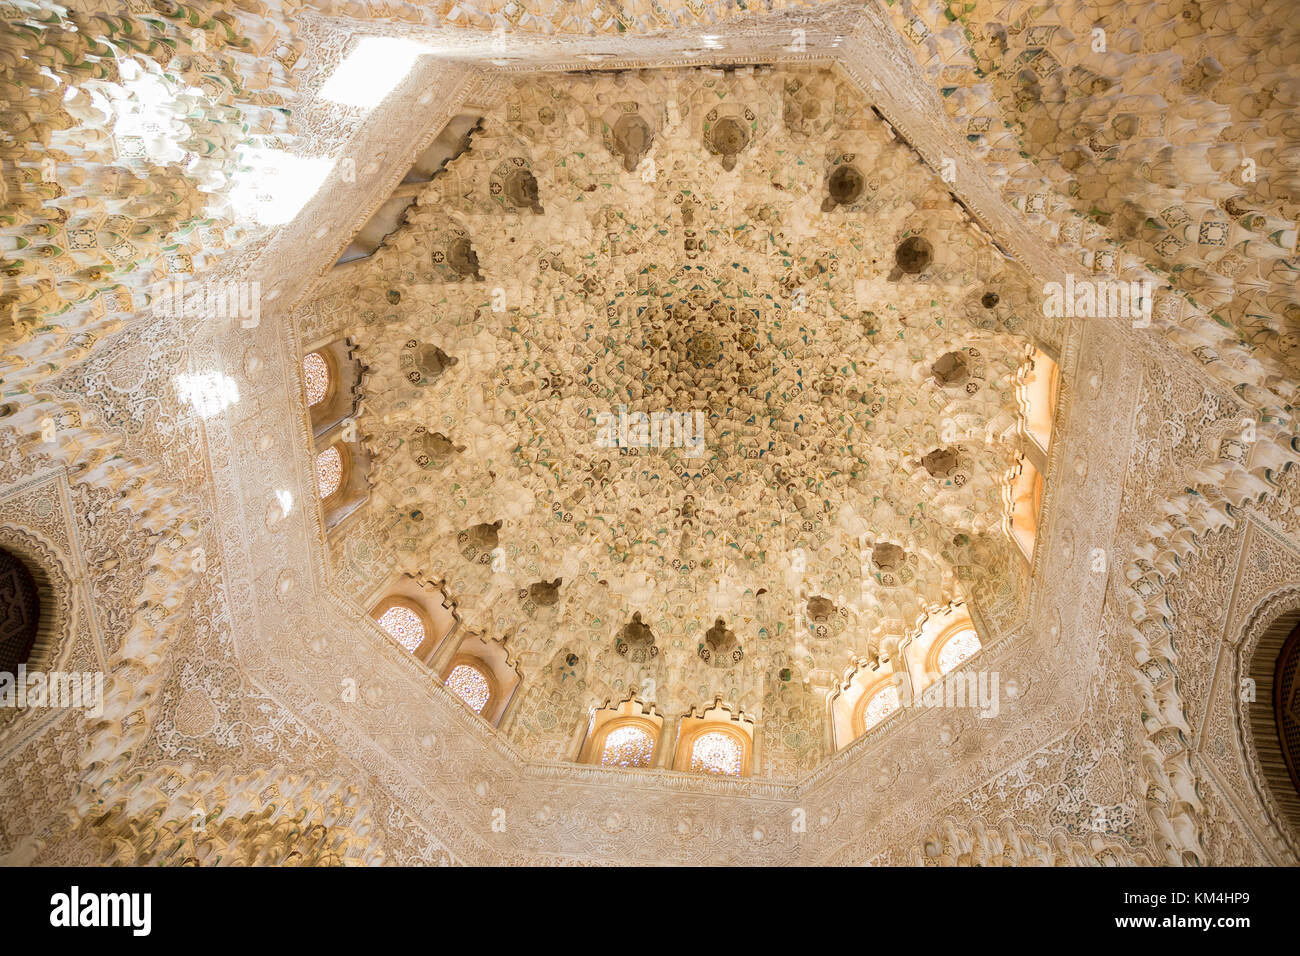 Decorative Ceiling carvings in the Alhambra, Granada, Spain Stock Photo